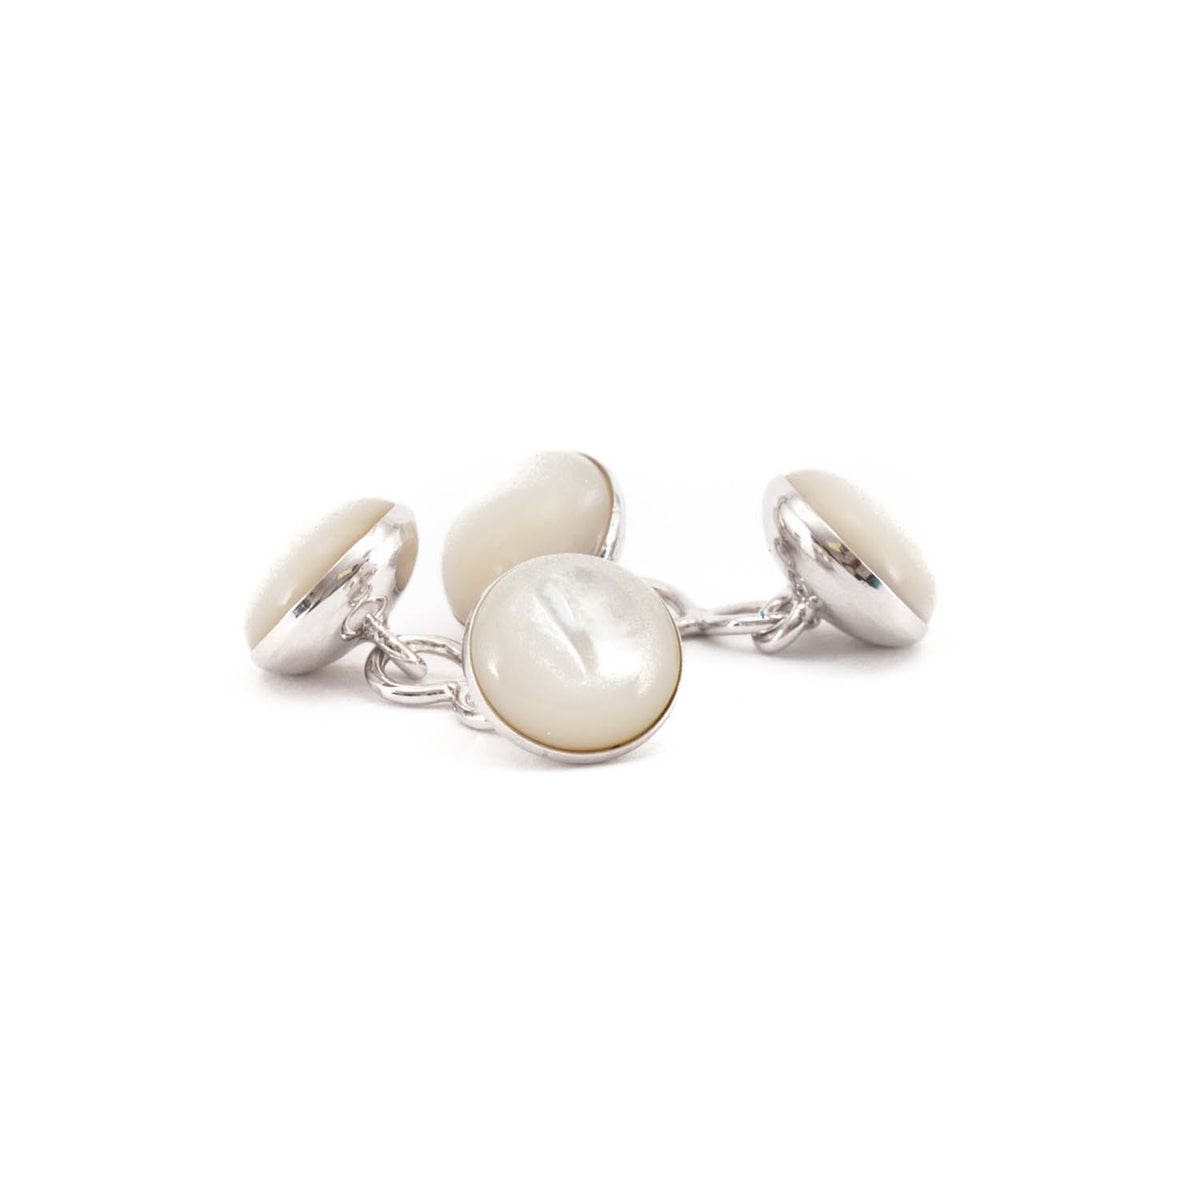 Three Mother of Pearl Silver Stone Capsule Cufflinks on a silver plate by KirbyAllison.com.